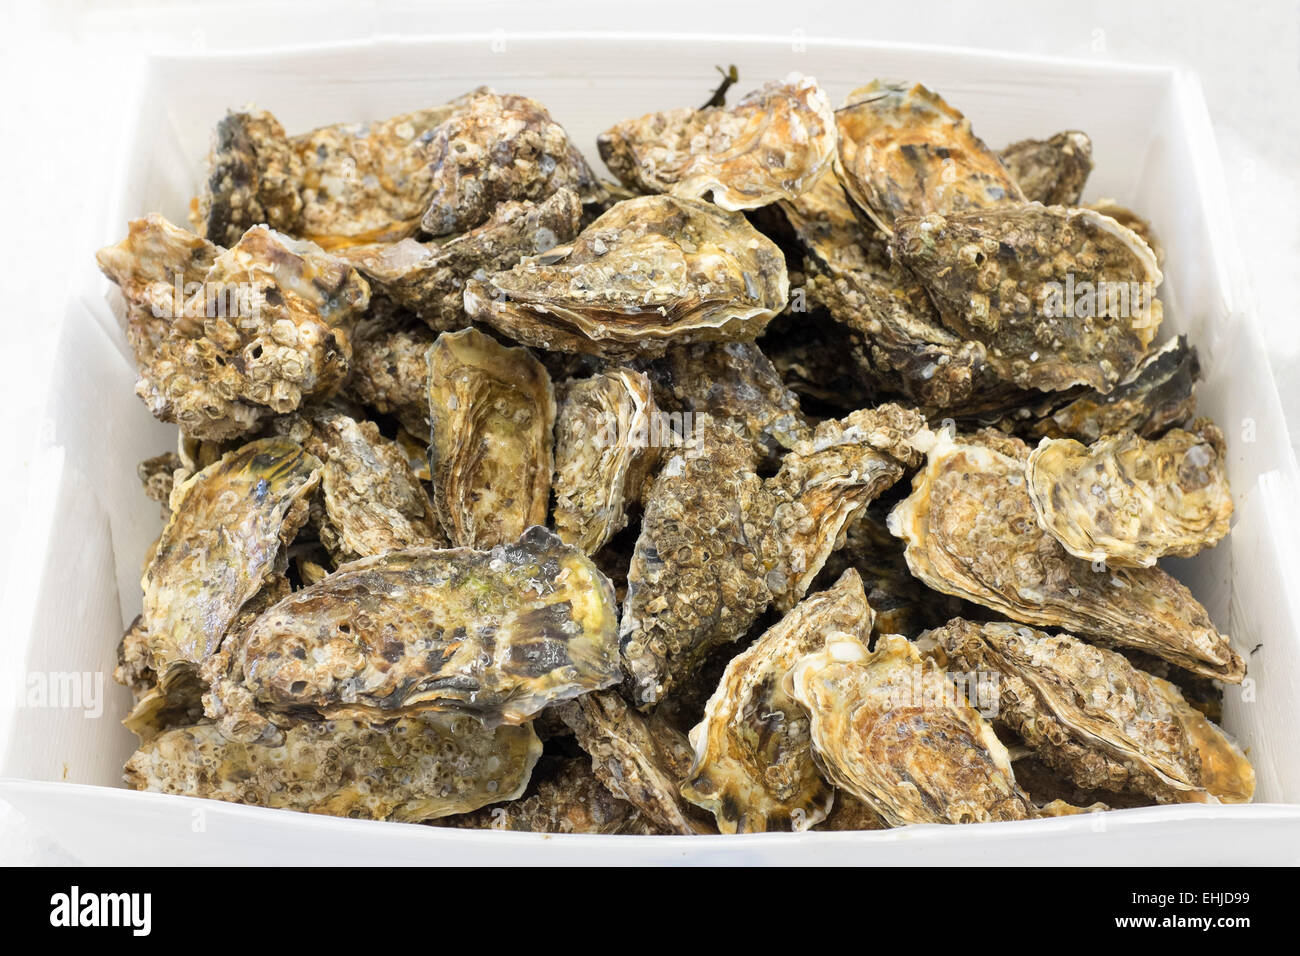 Oysters at Whitstable Fish Market in Kent England Stock Photo